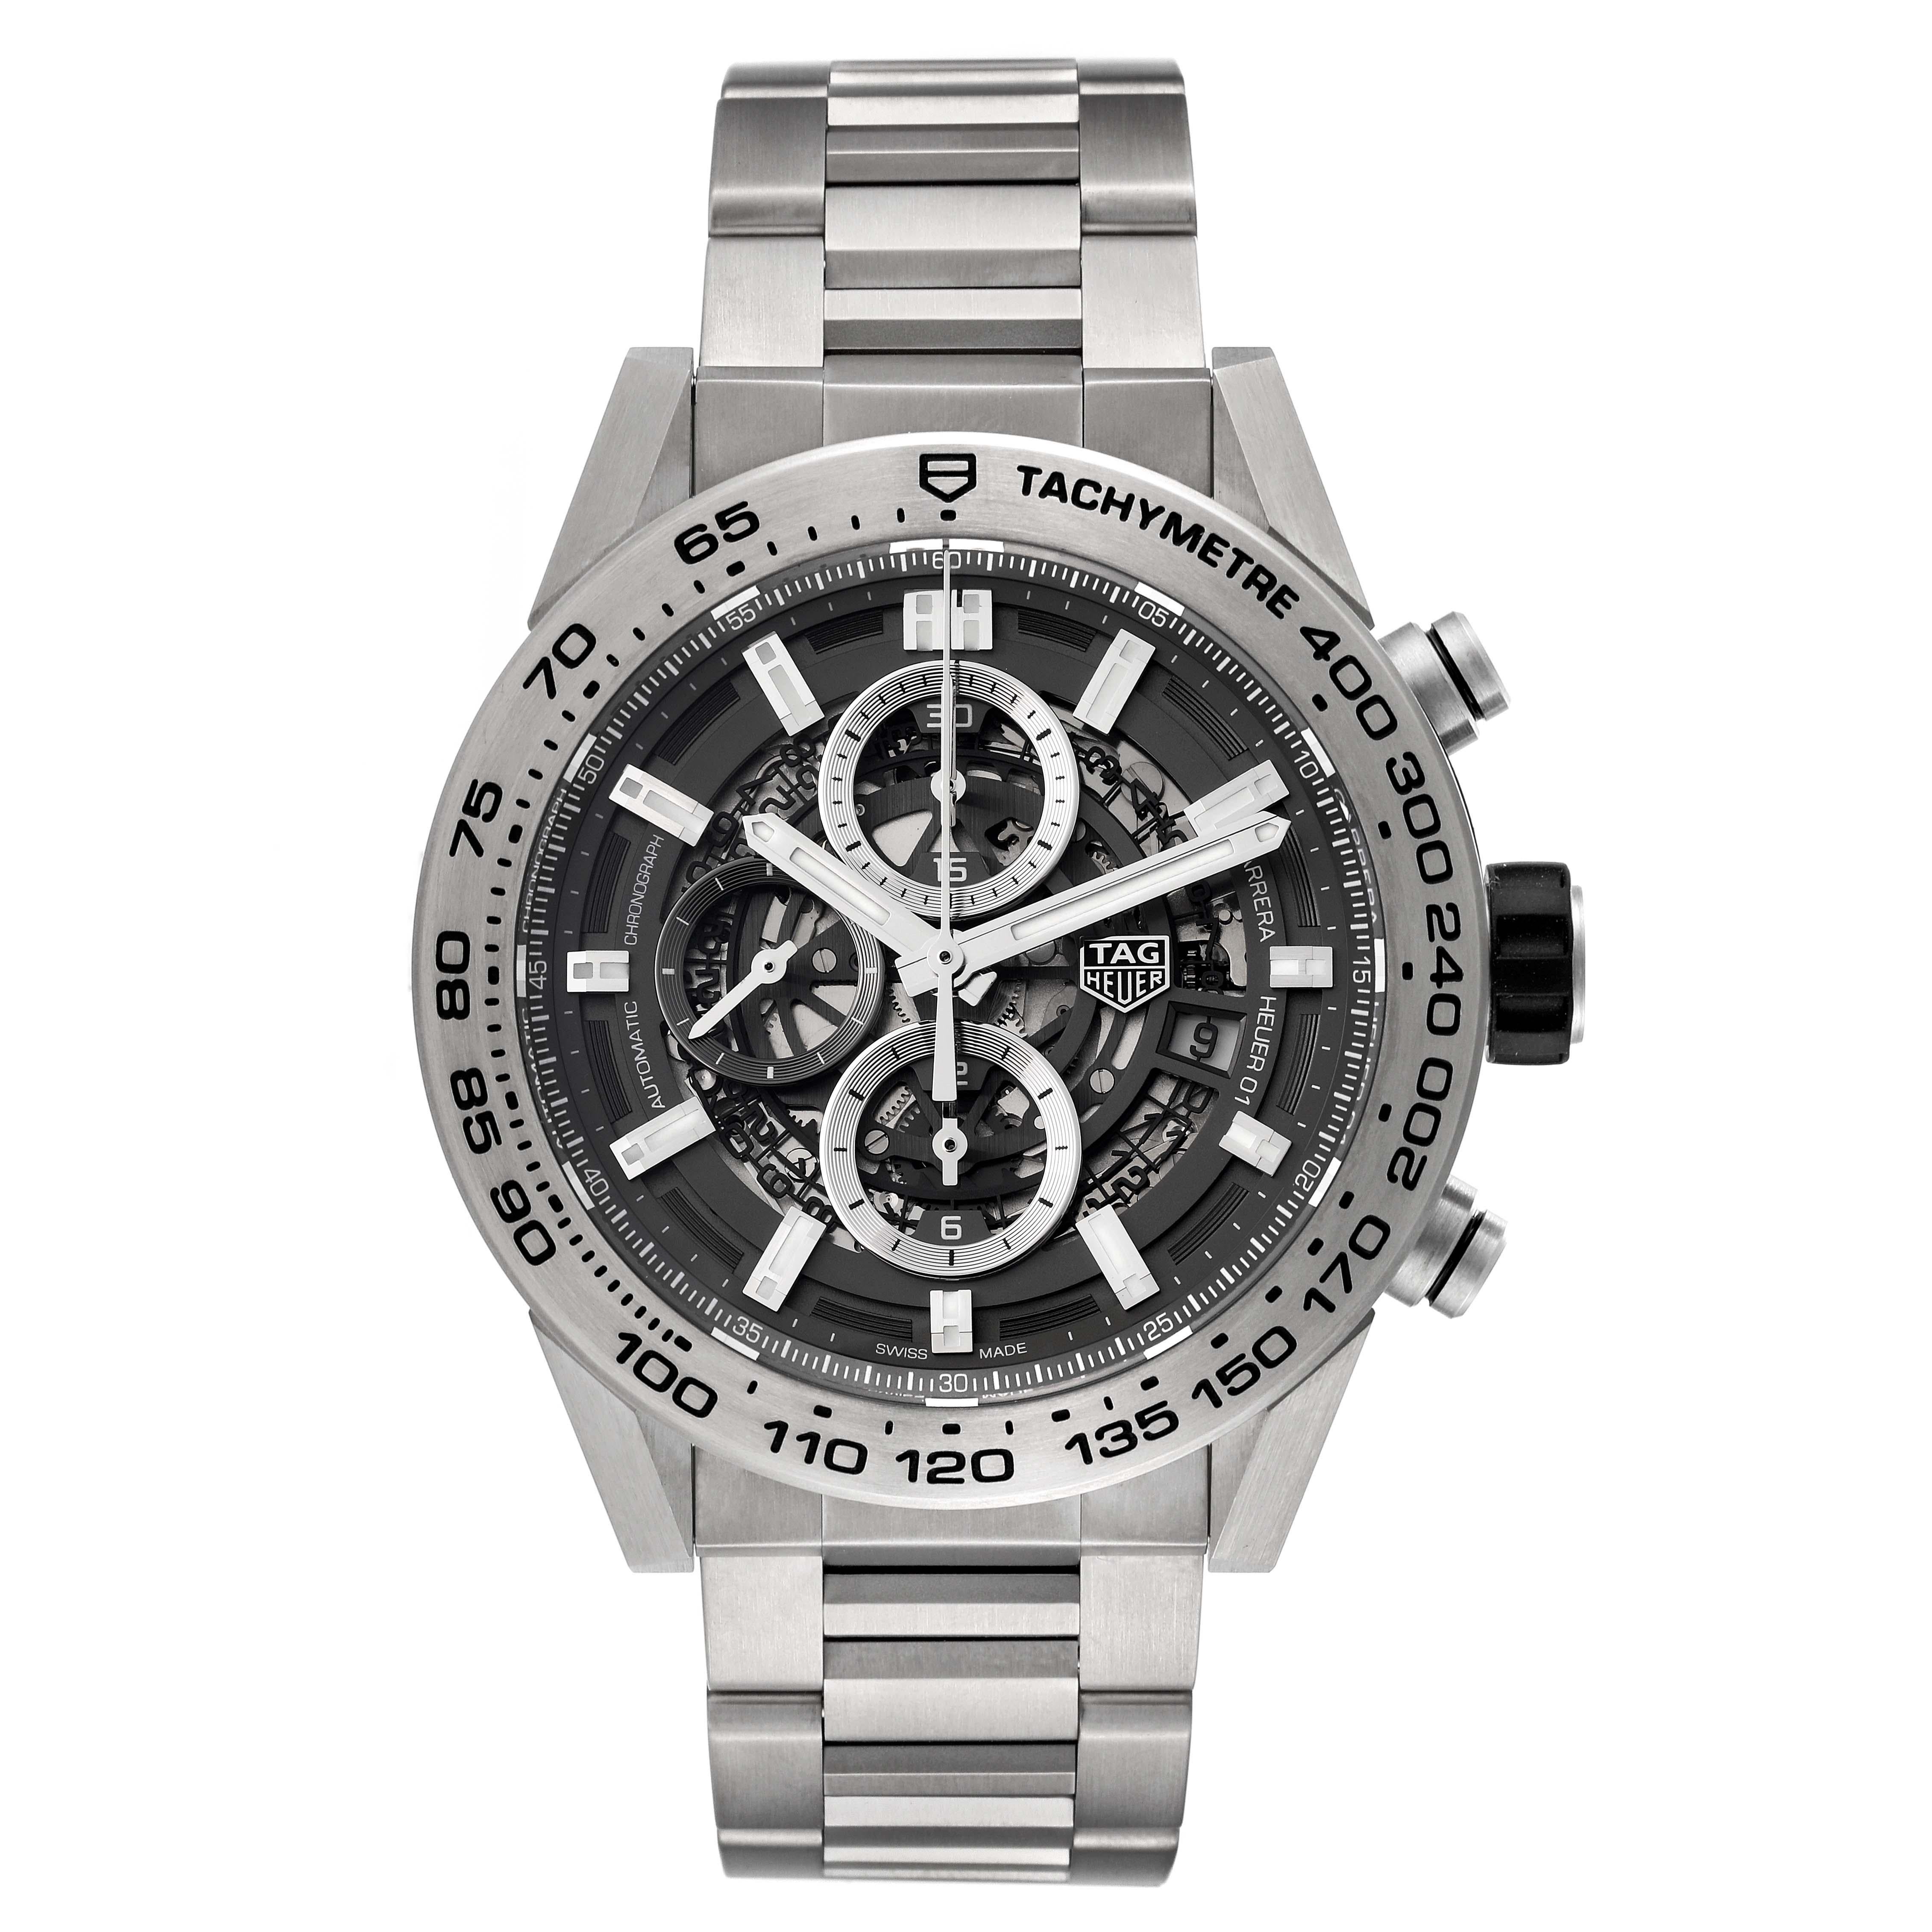 TAG Heuer Carrera Skeleton Dial Titanium Mens Watch CAR2A8A Box Card. Automatic self-winding movement. Titanium case 45 mm in diameter. Case thickness: 16.5 mm. Exhibition sapphire crystal caseback. Steel and rubber crown. Titanium bezel with black